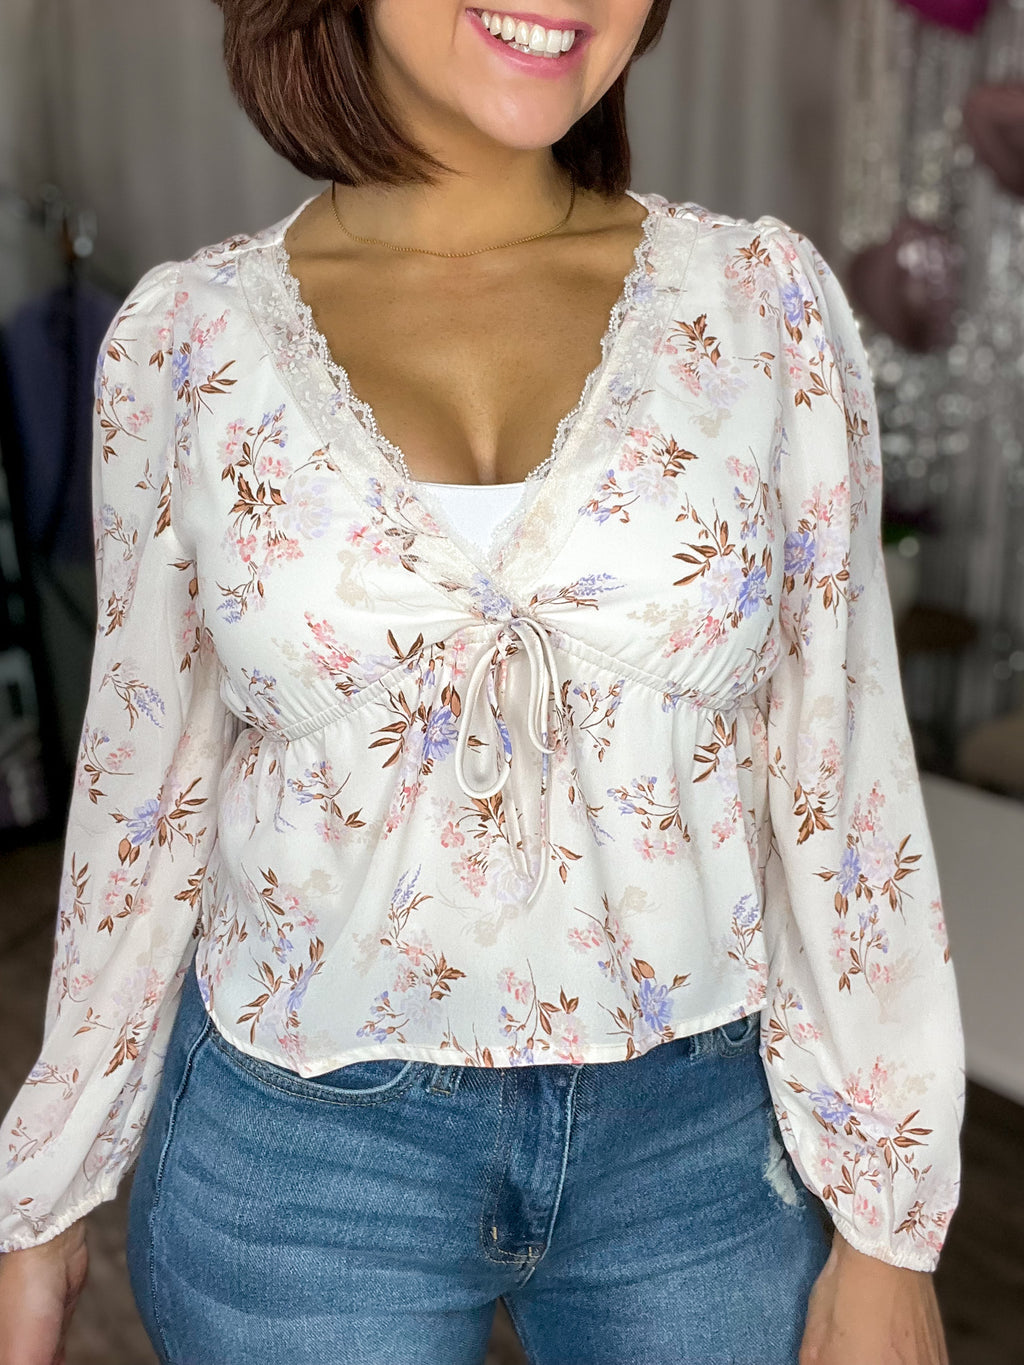 The Sweetest Thing Blouse